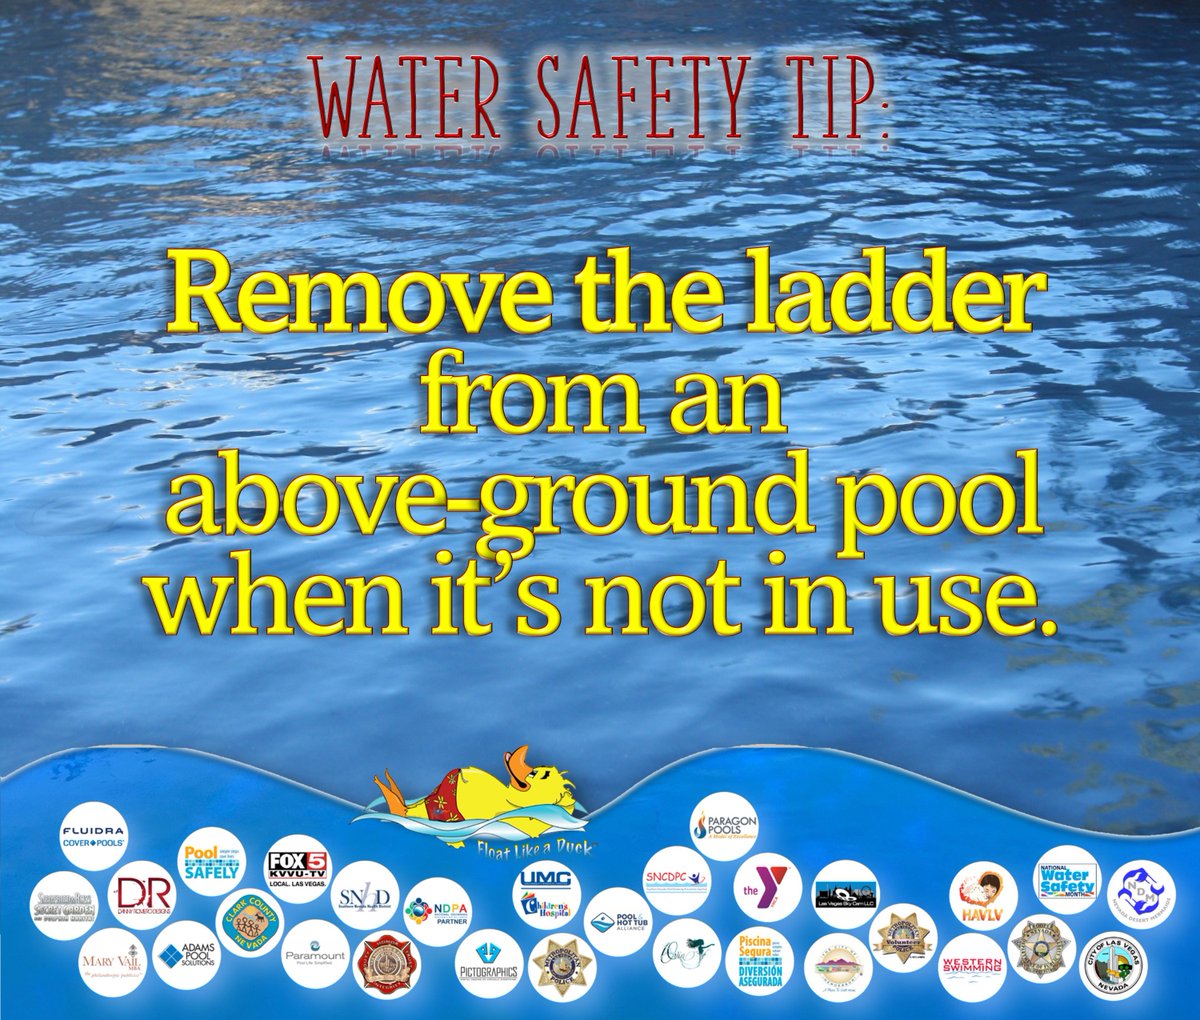 Remove the ladder from an above-ground pool when it’s not in use. #abovegroundpools #poolladder #removeaccess #floatlikeaduck #childsafety #WaterSafety #watersafetymonth #watersafetytip #paragonpoolslv @MayisNWSM @ThePHTA @poolsafely @drownalliance @SNCDPC @LasVegasFD @LVMPD